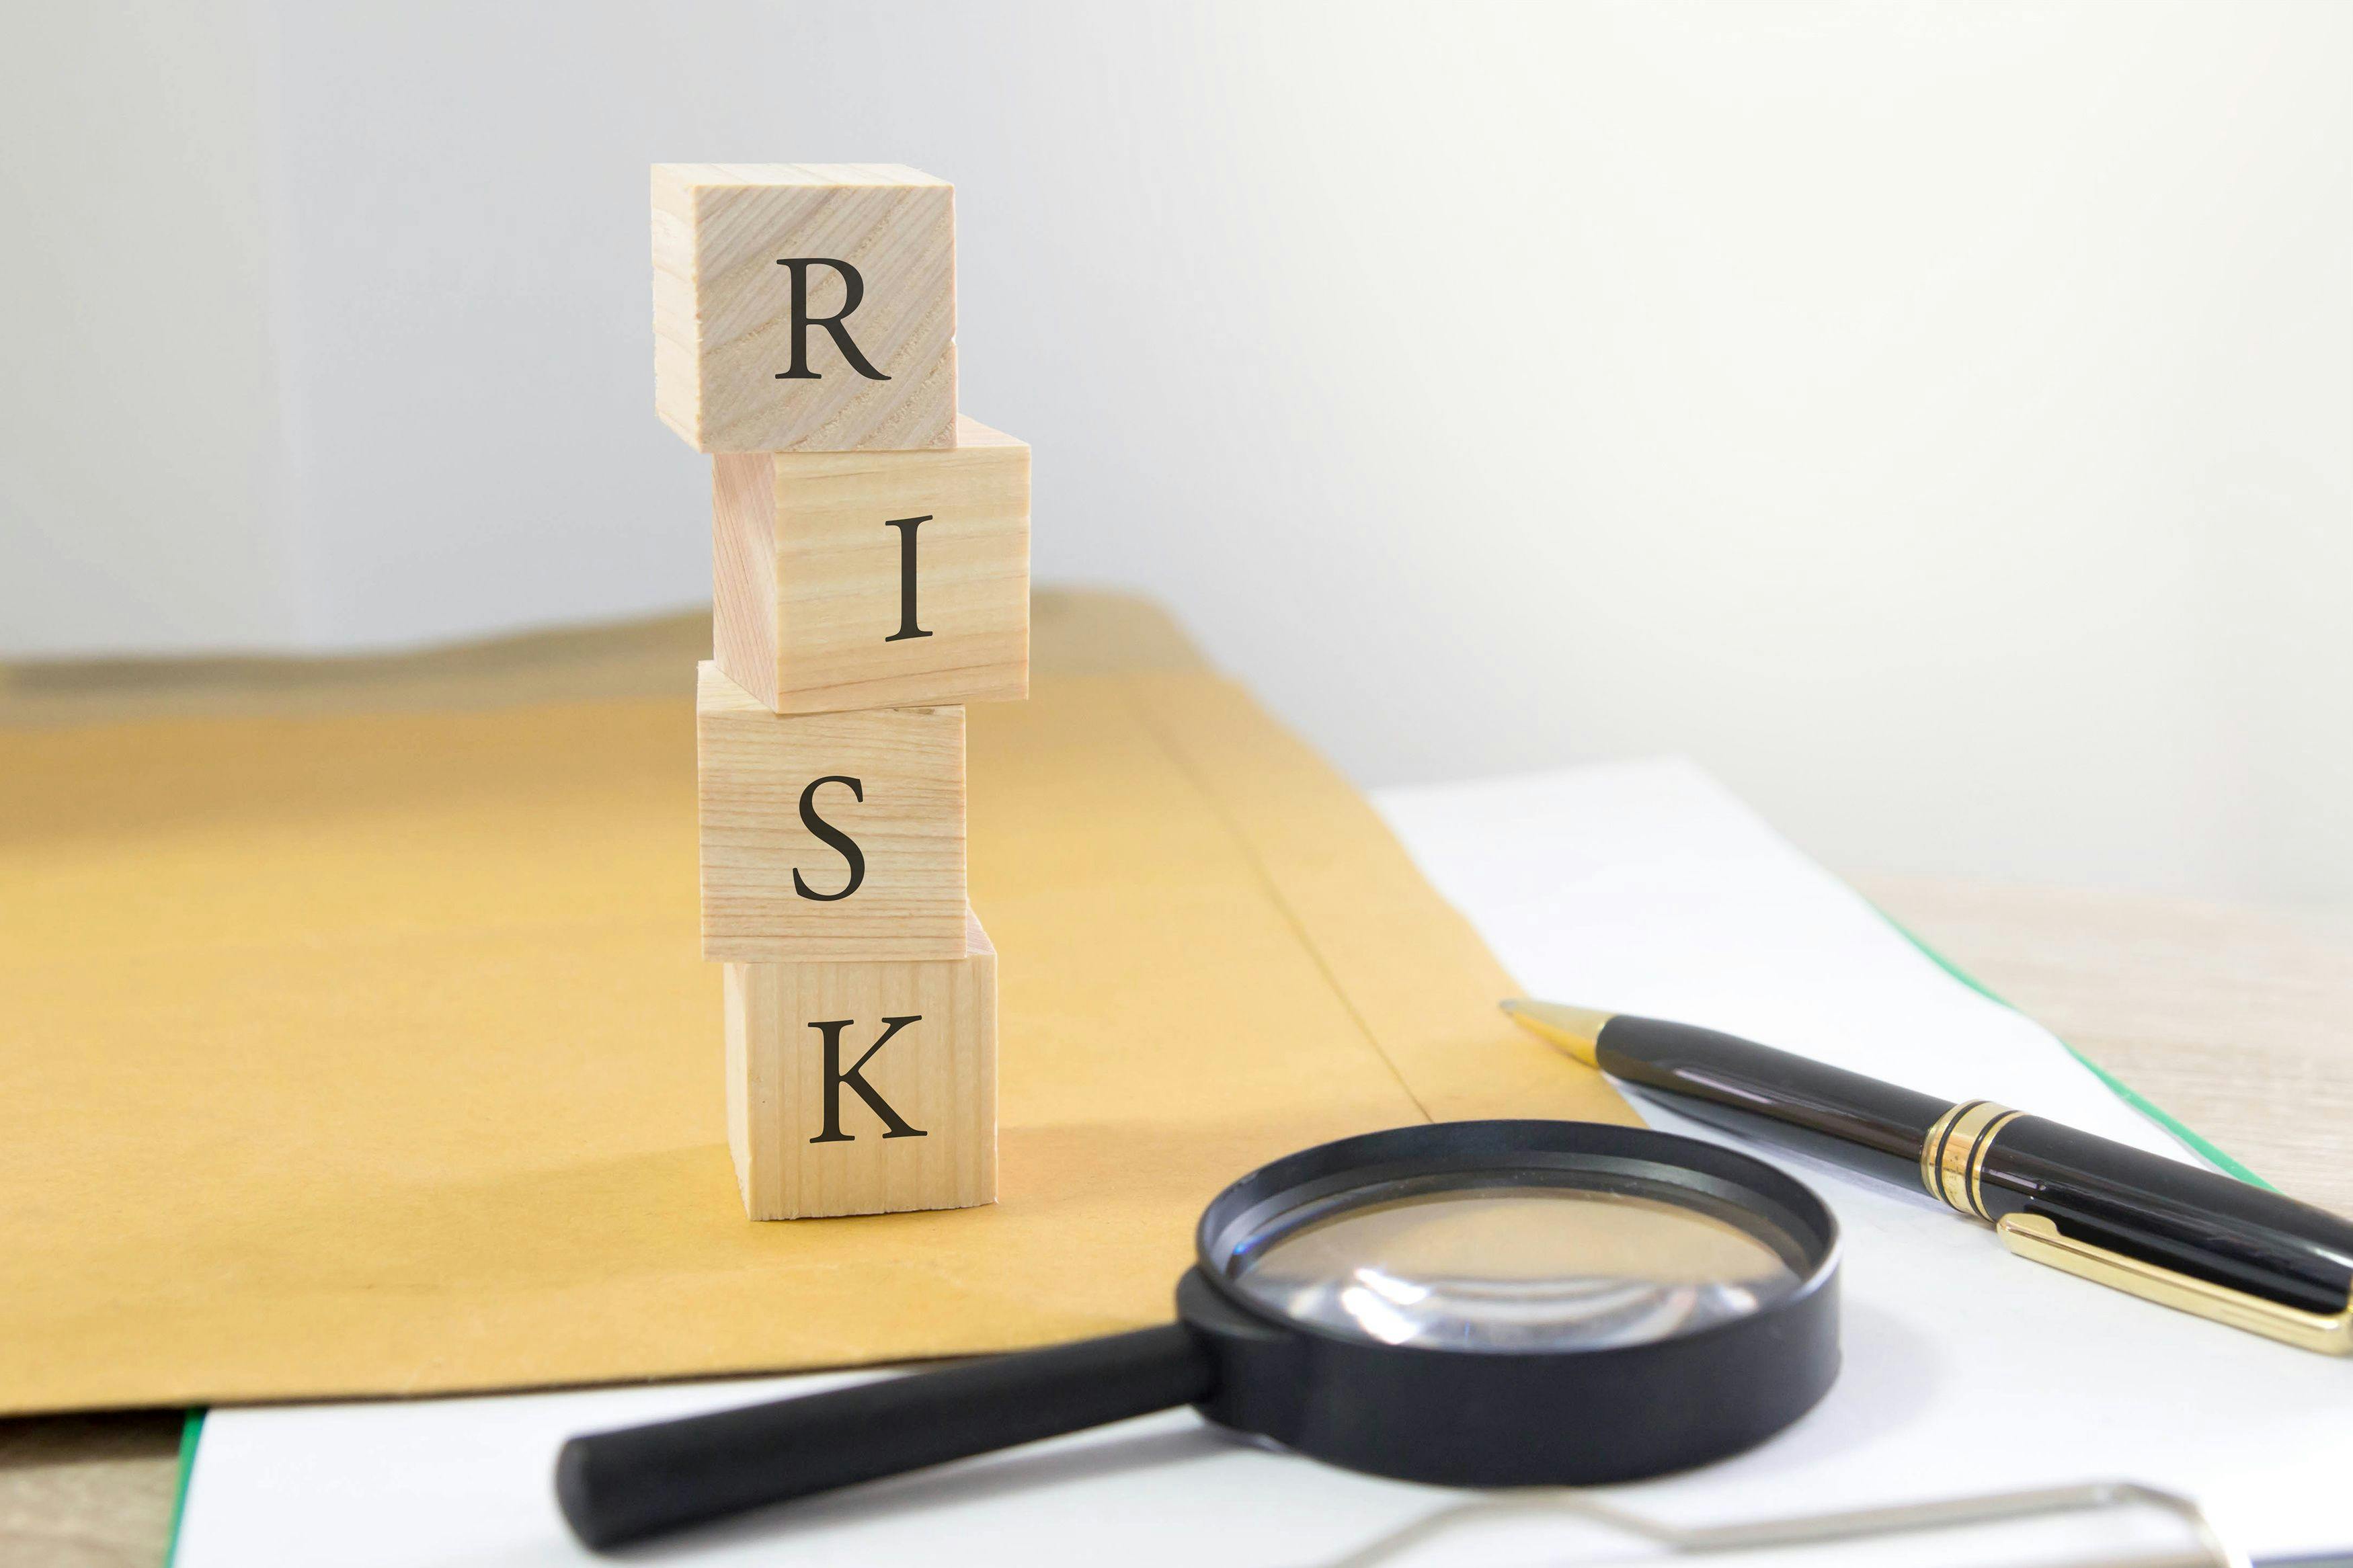 risk written on blocks and a magnifying glass | © janews094 - stock.adobe.com